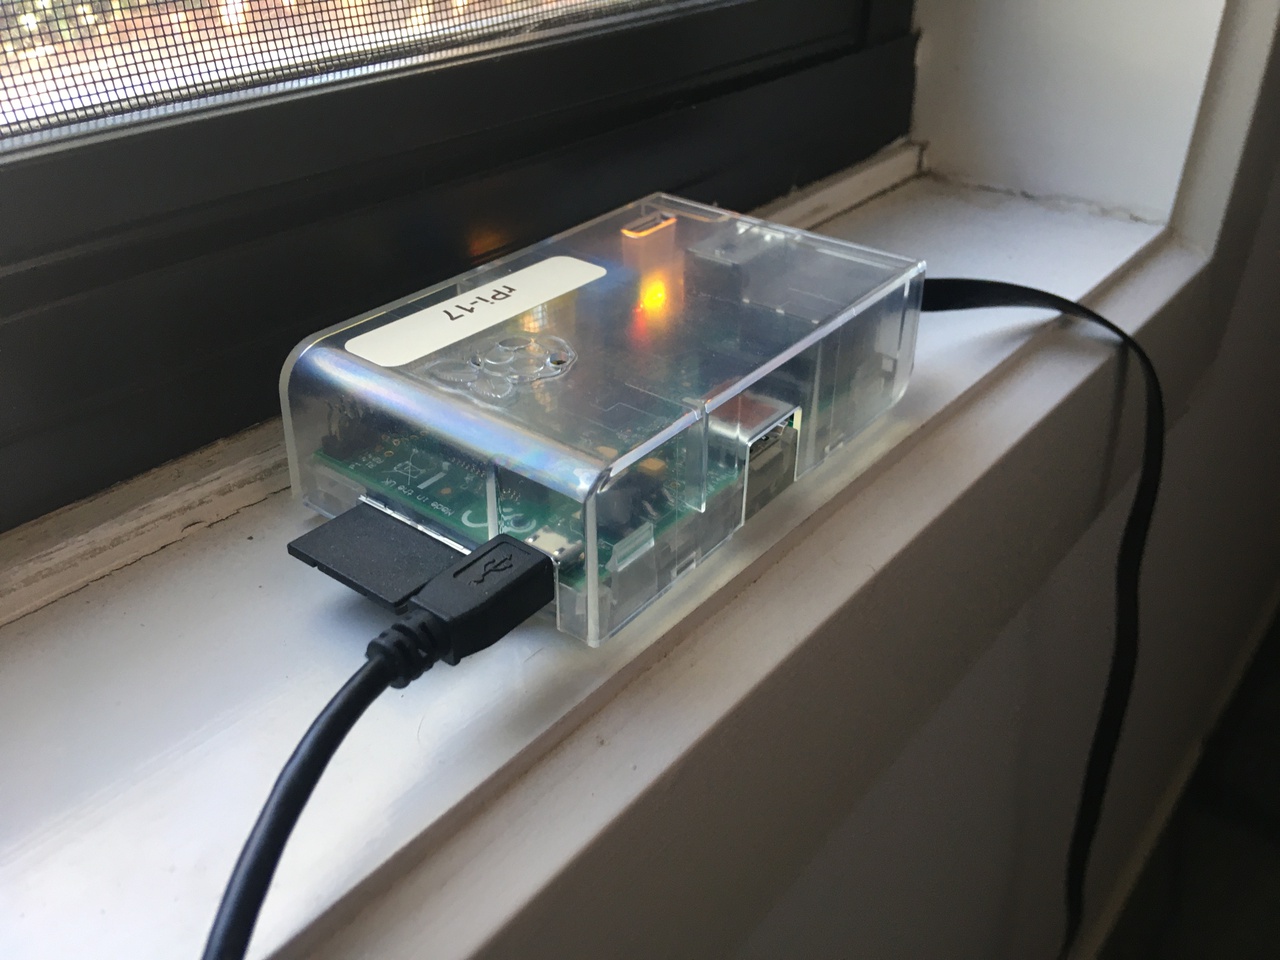 A small computer in a plastic case sitting on a windowsill